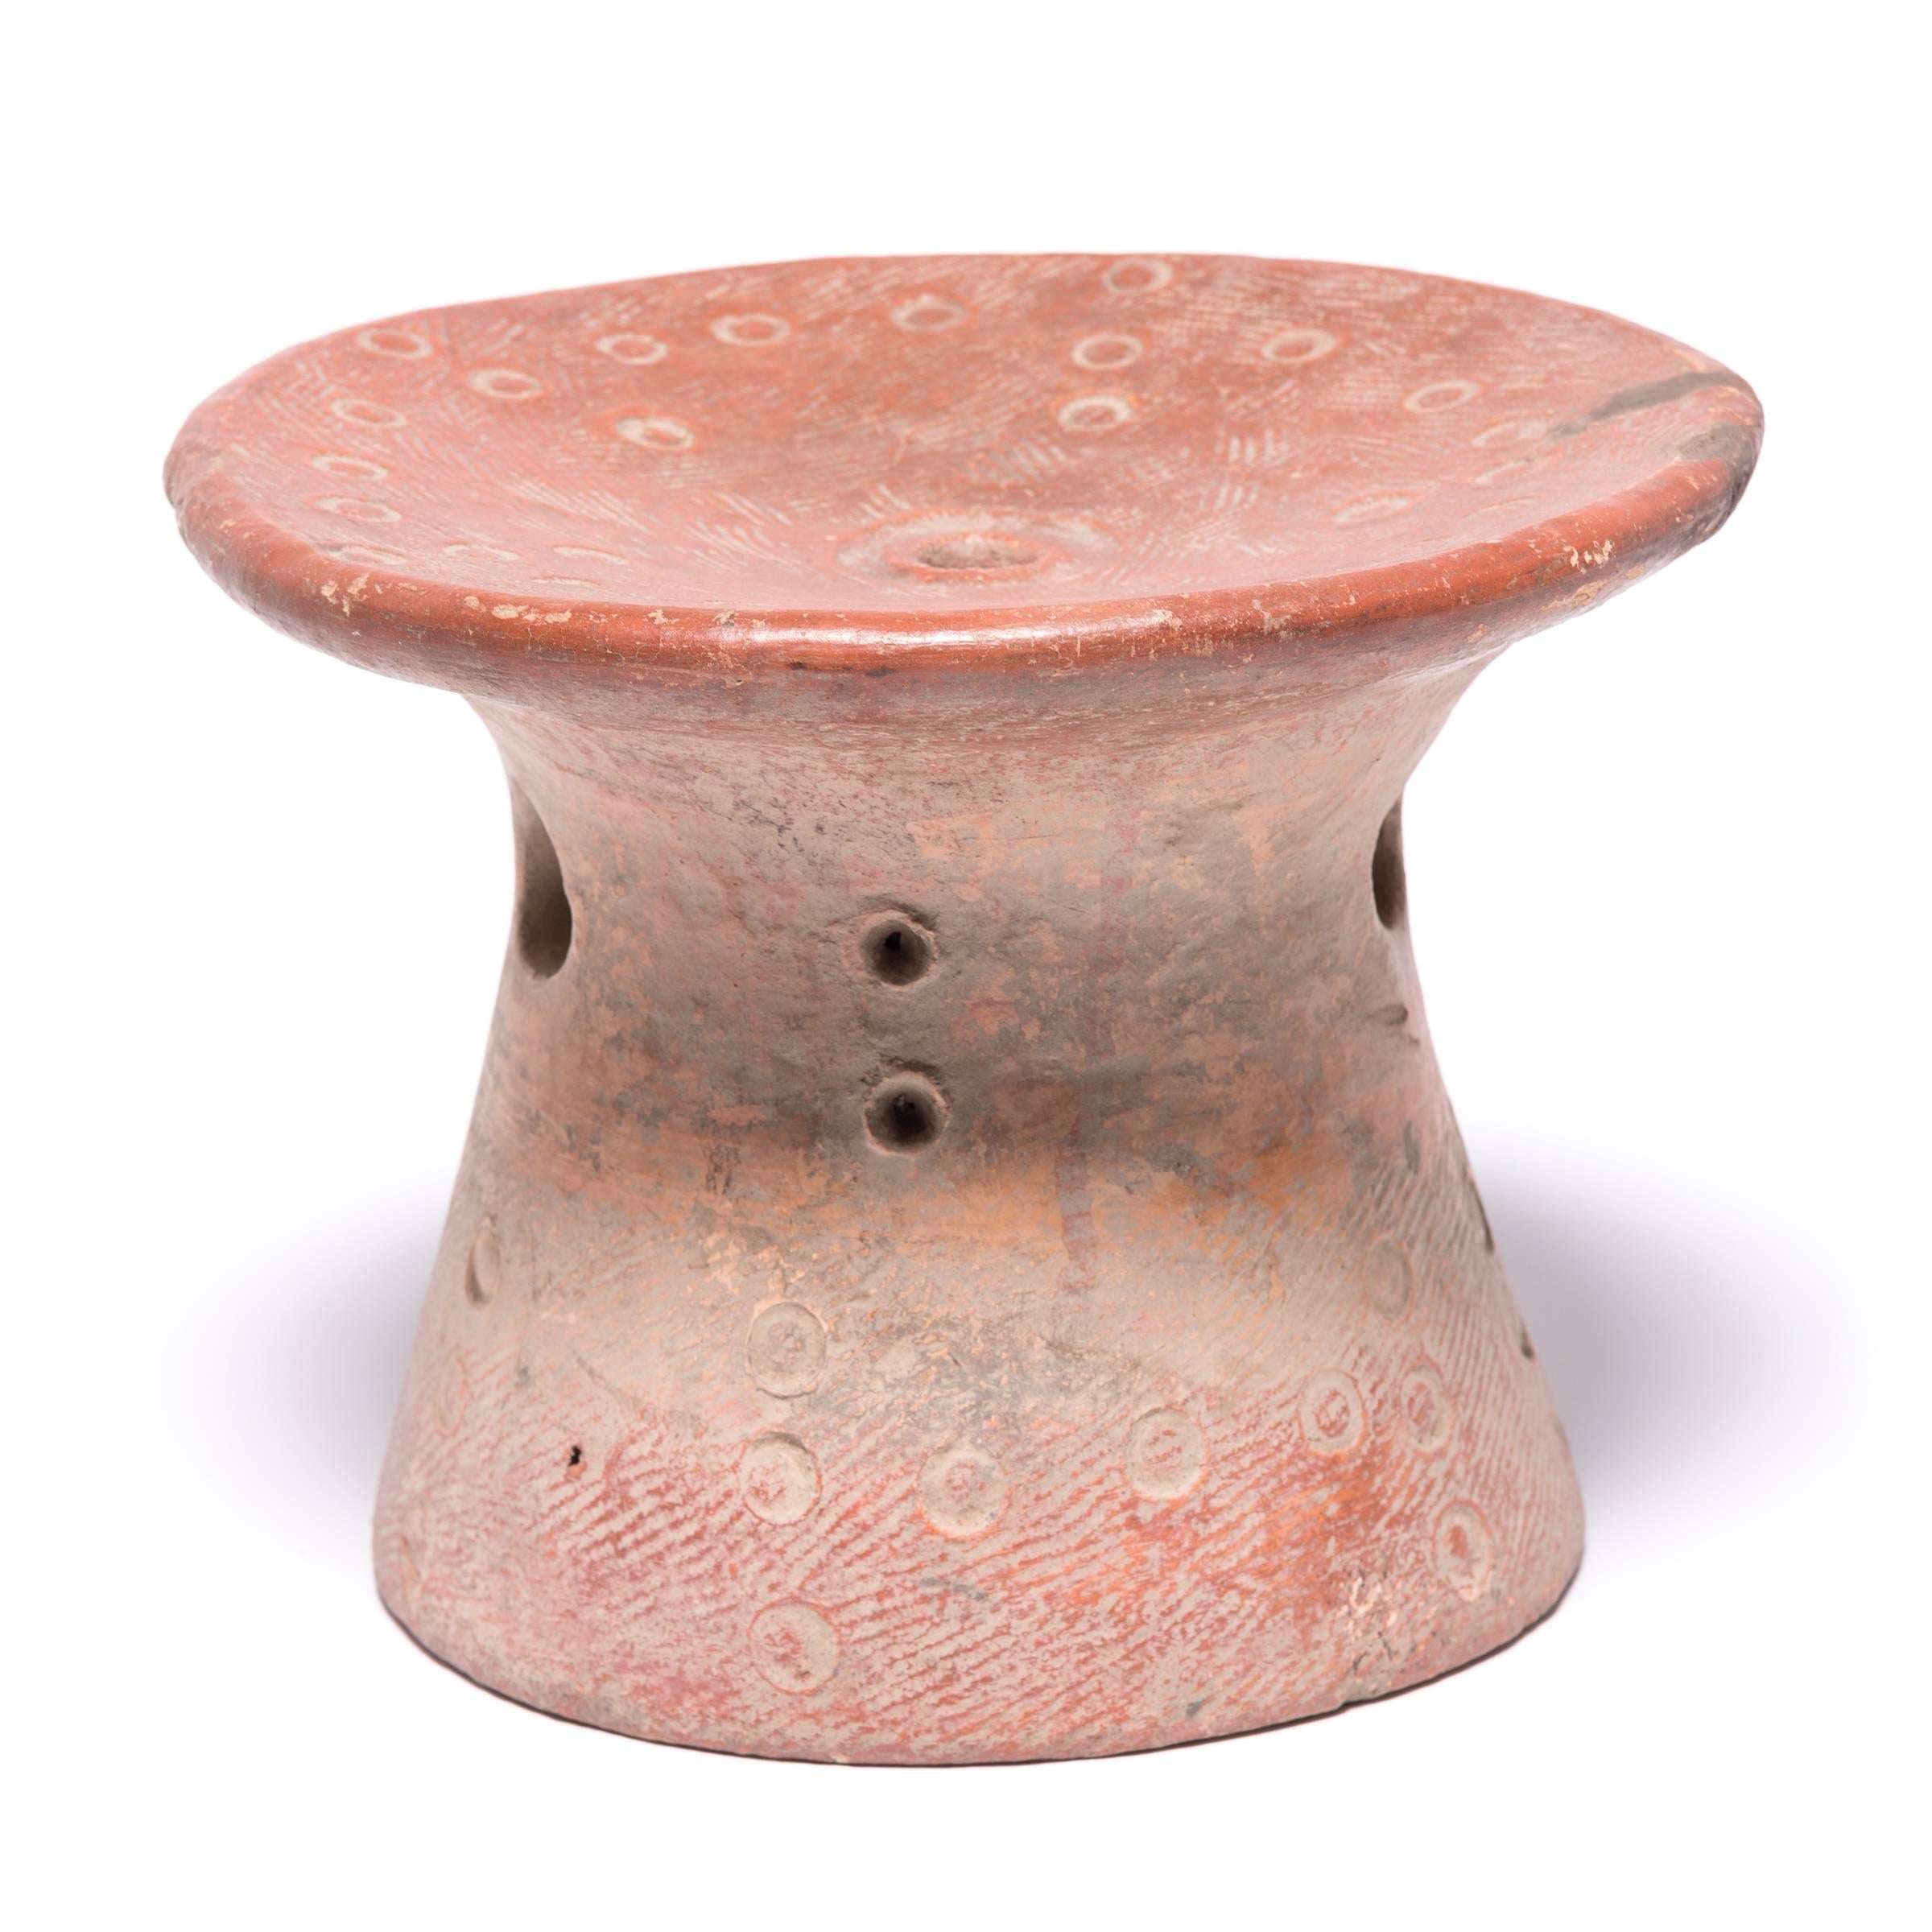 Called a tigué in the Bozo language, this ceramic stool was given as a gift to a new bride among the Niger River-dwelling people of Mali. Seated on the stool upon arrival to her husband's home, the bride took pride in her gift, as well as comfort in